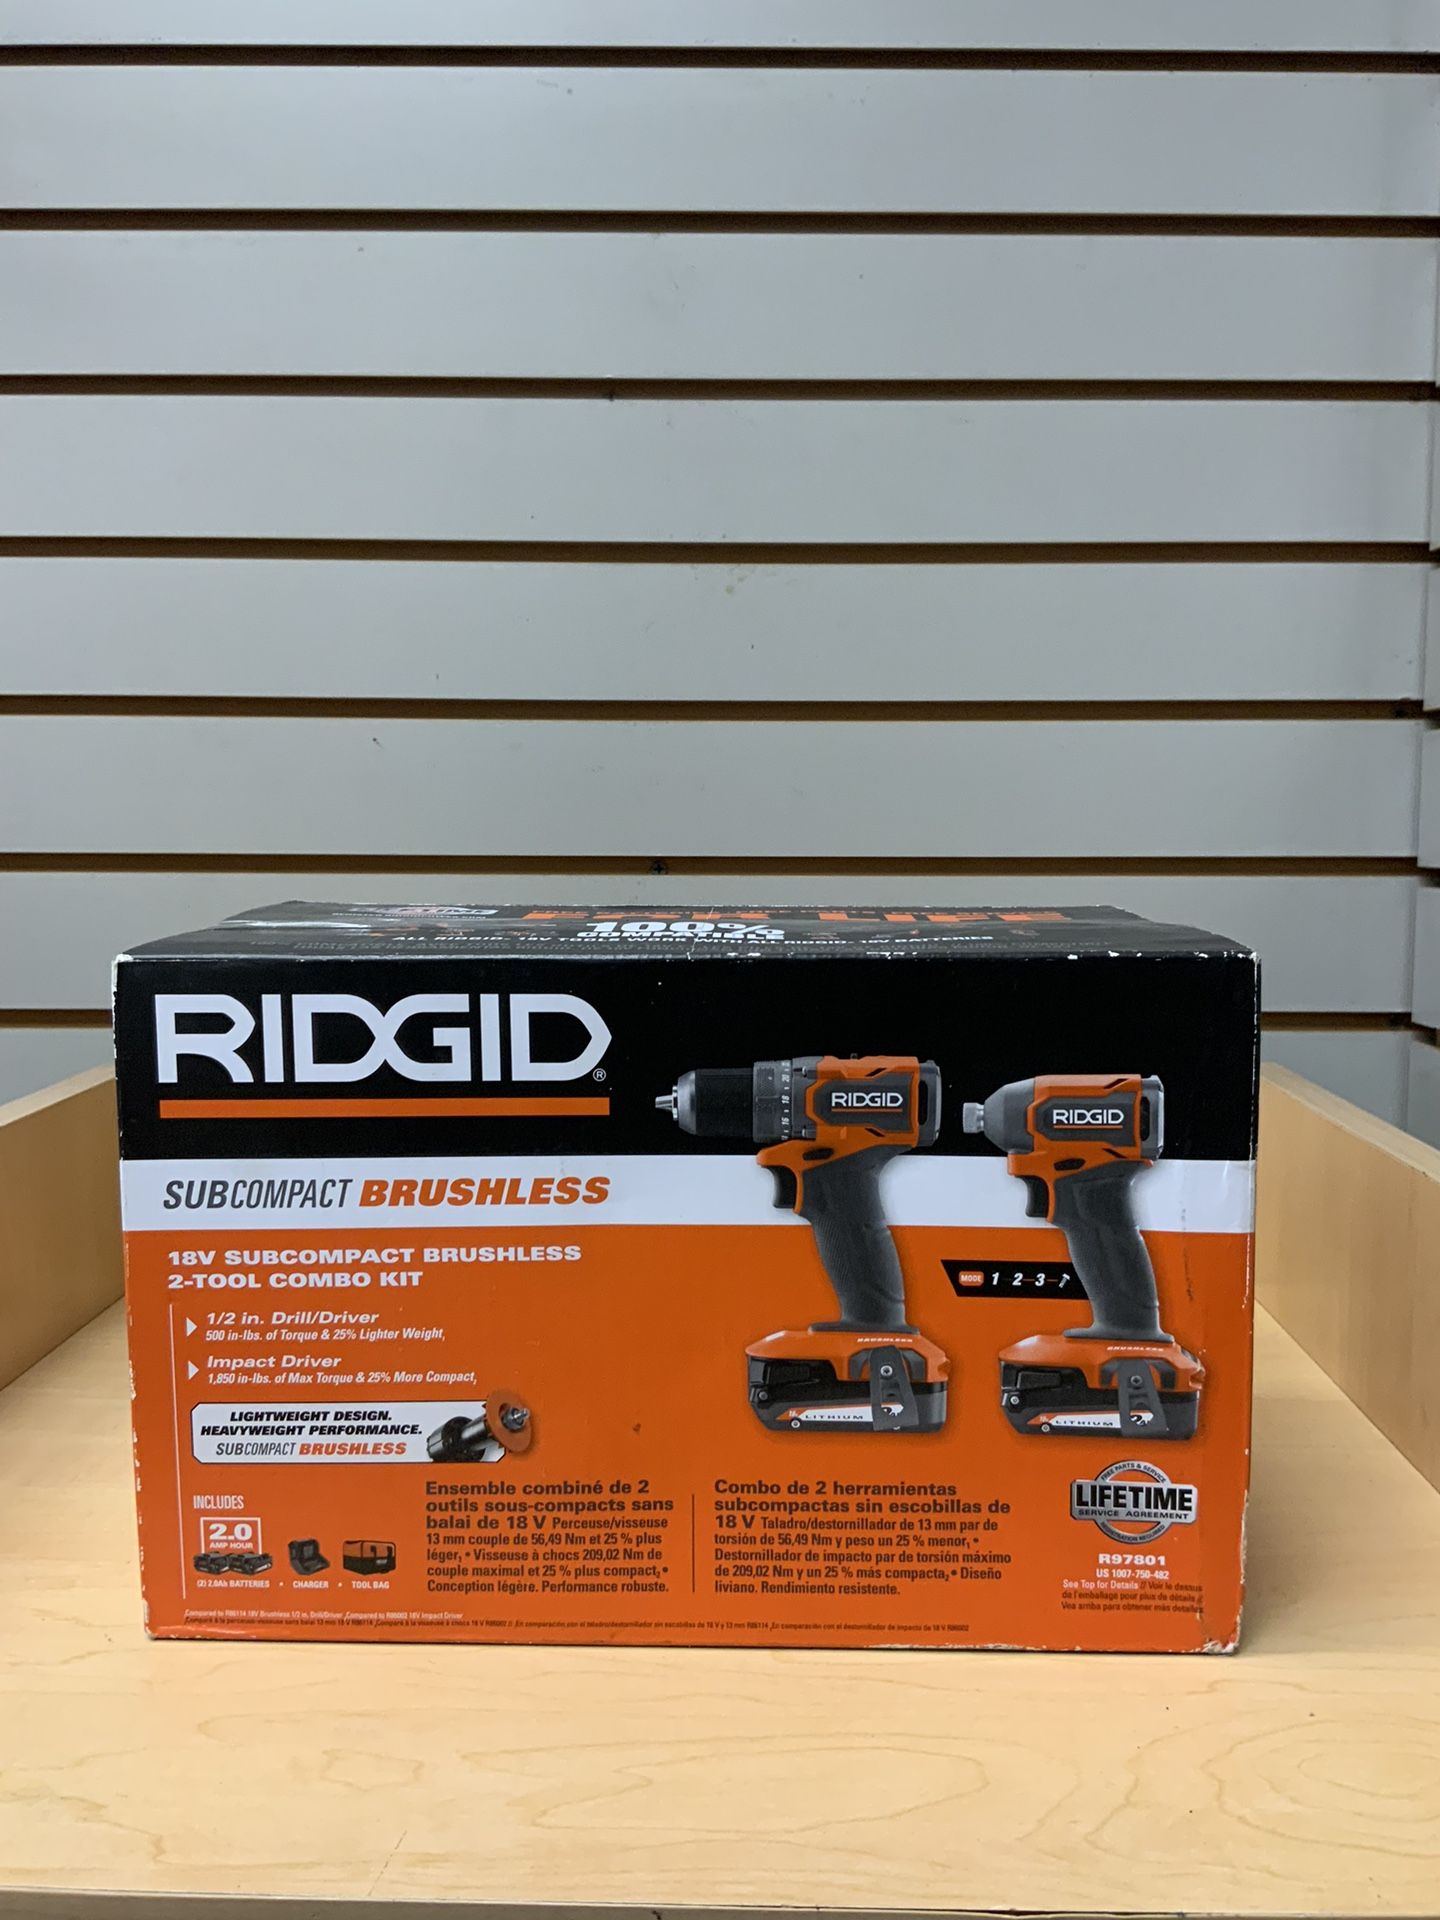 NEW RIDGID R97801 18V Subcompact Brushless 2-Tool Combo Kit drill screwdriver IMPACT battery operated CHARGER